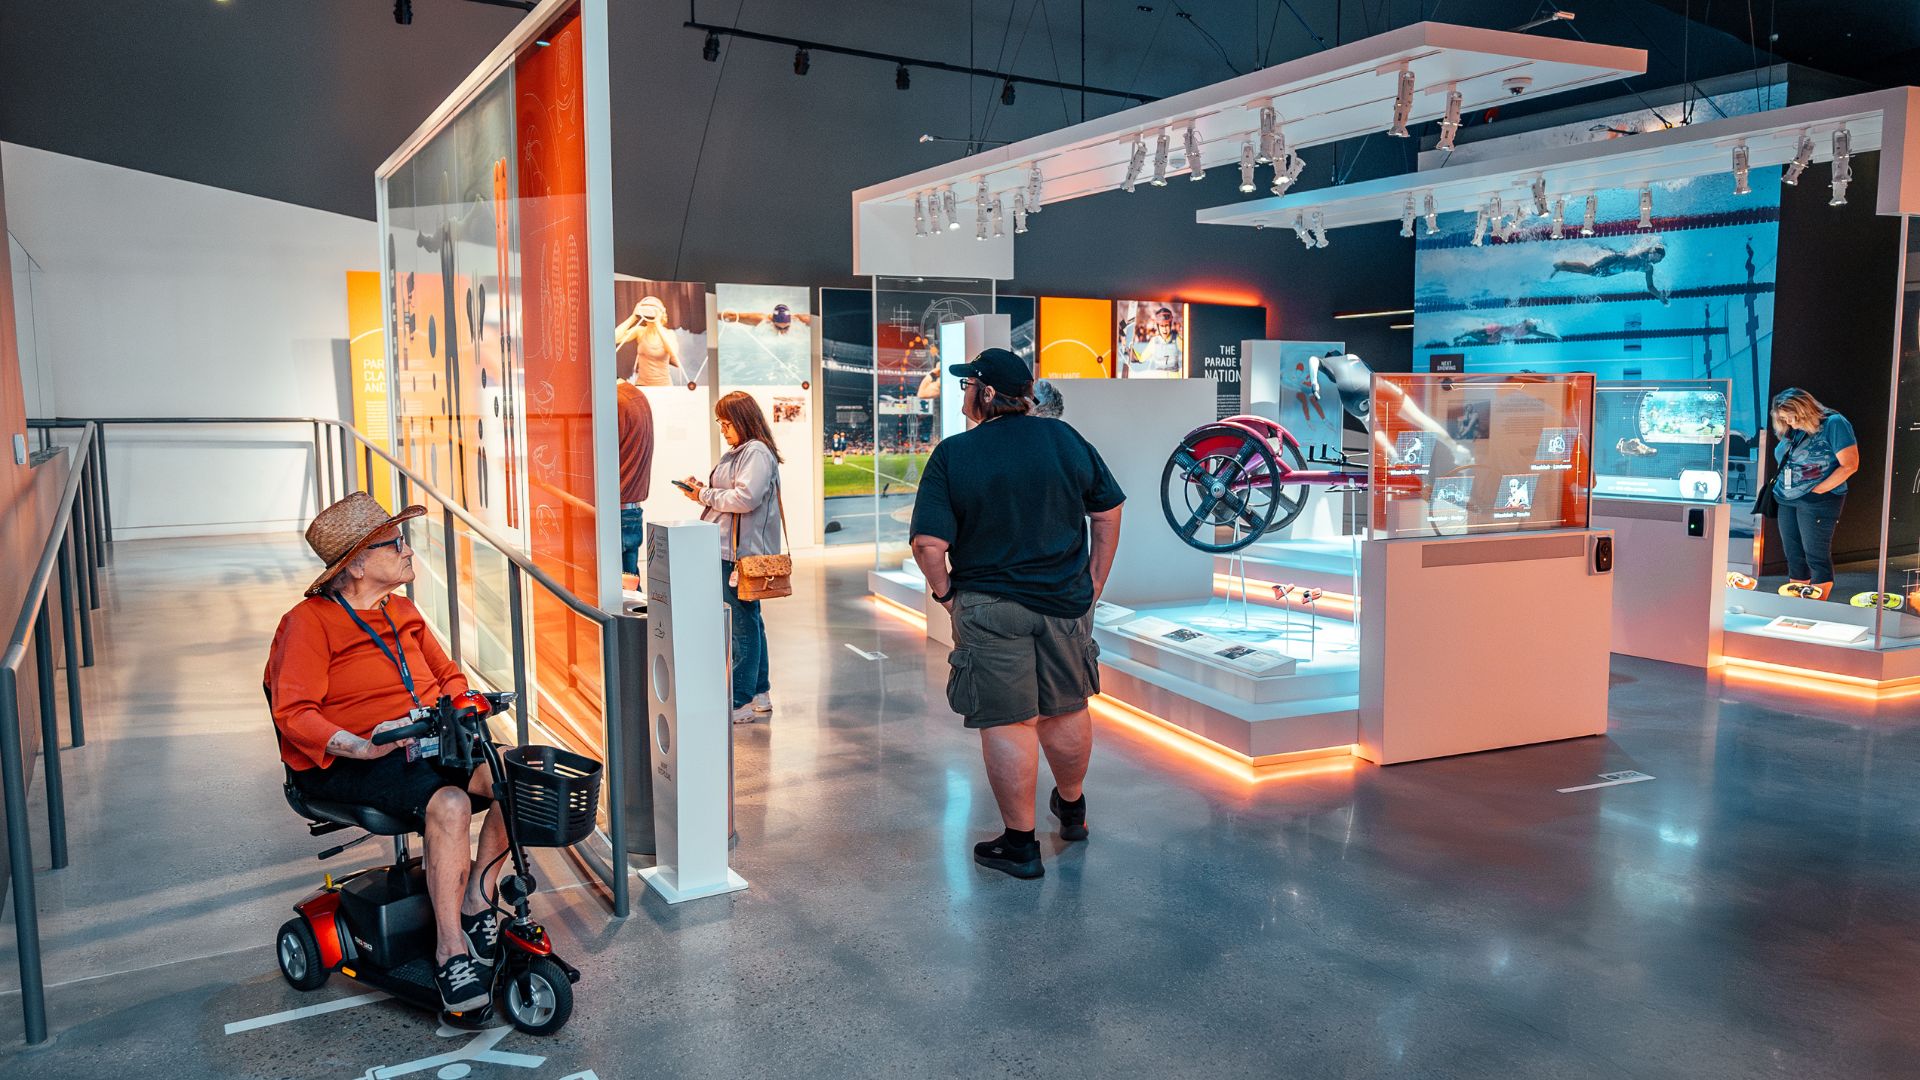 Accessibility and universal design at the U.S. Olympic & Paralympic Museum in Colorado Springs